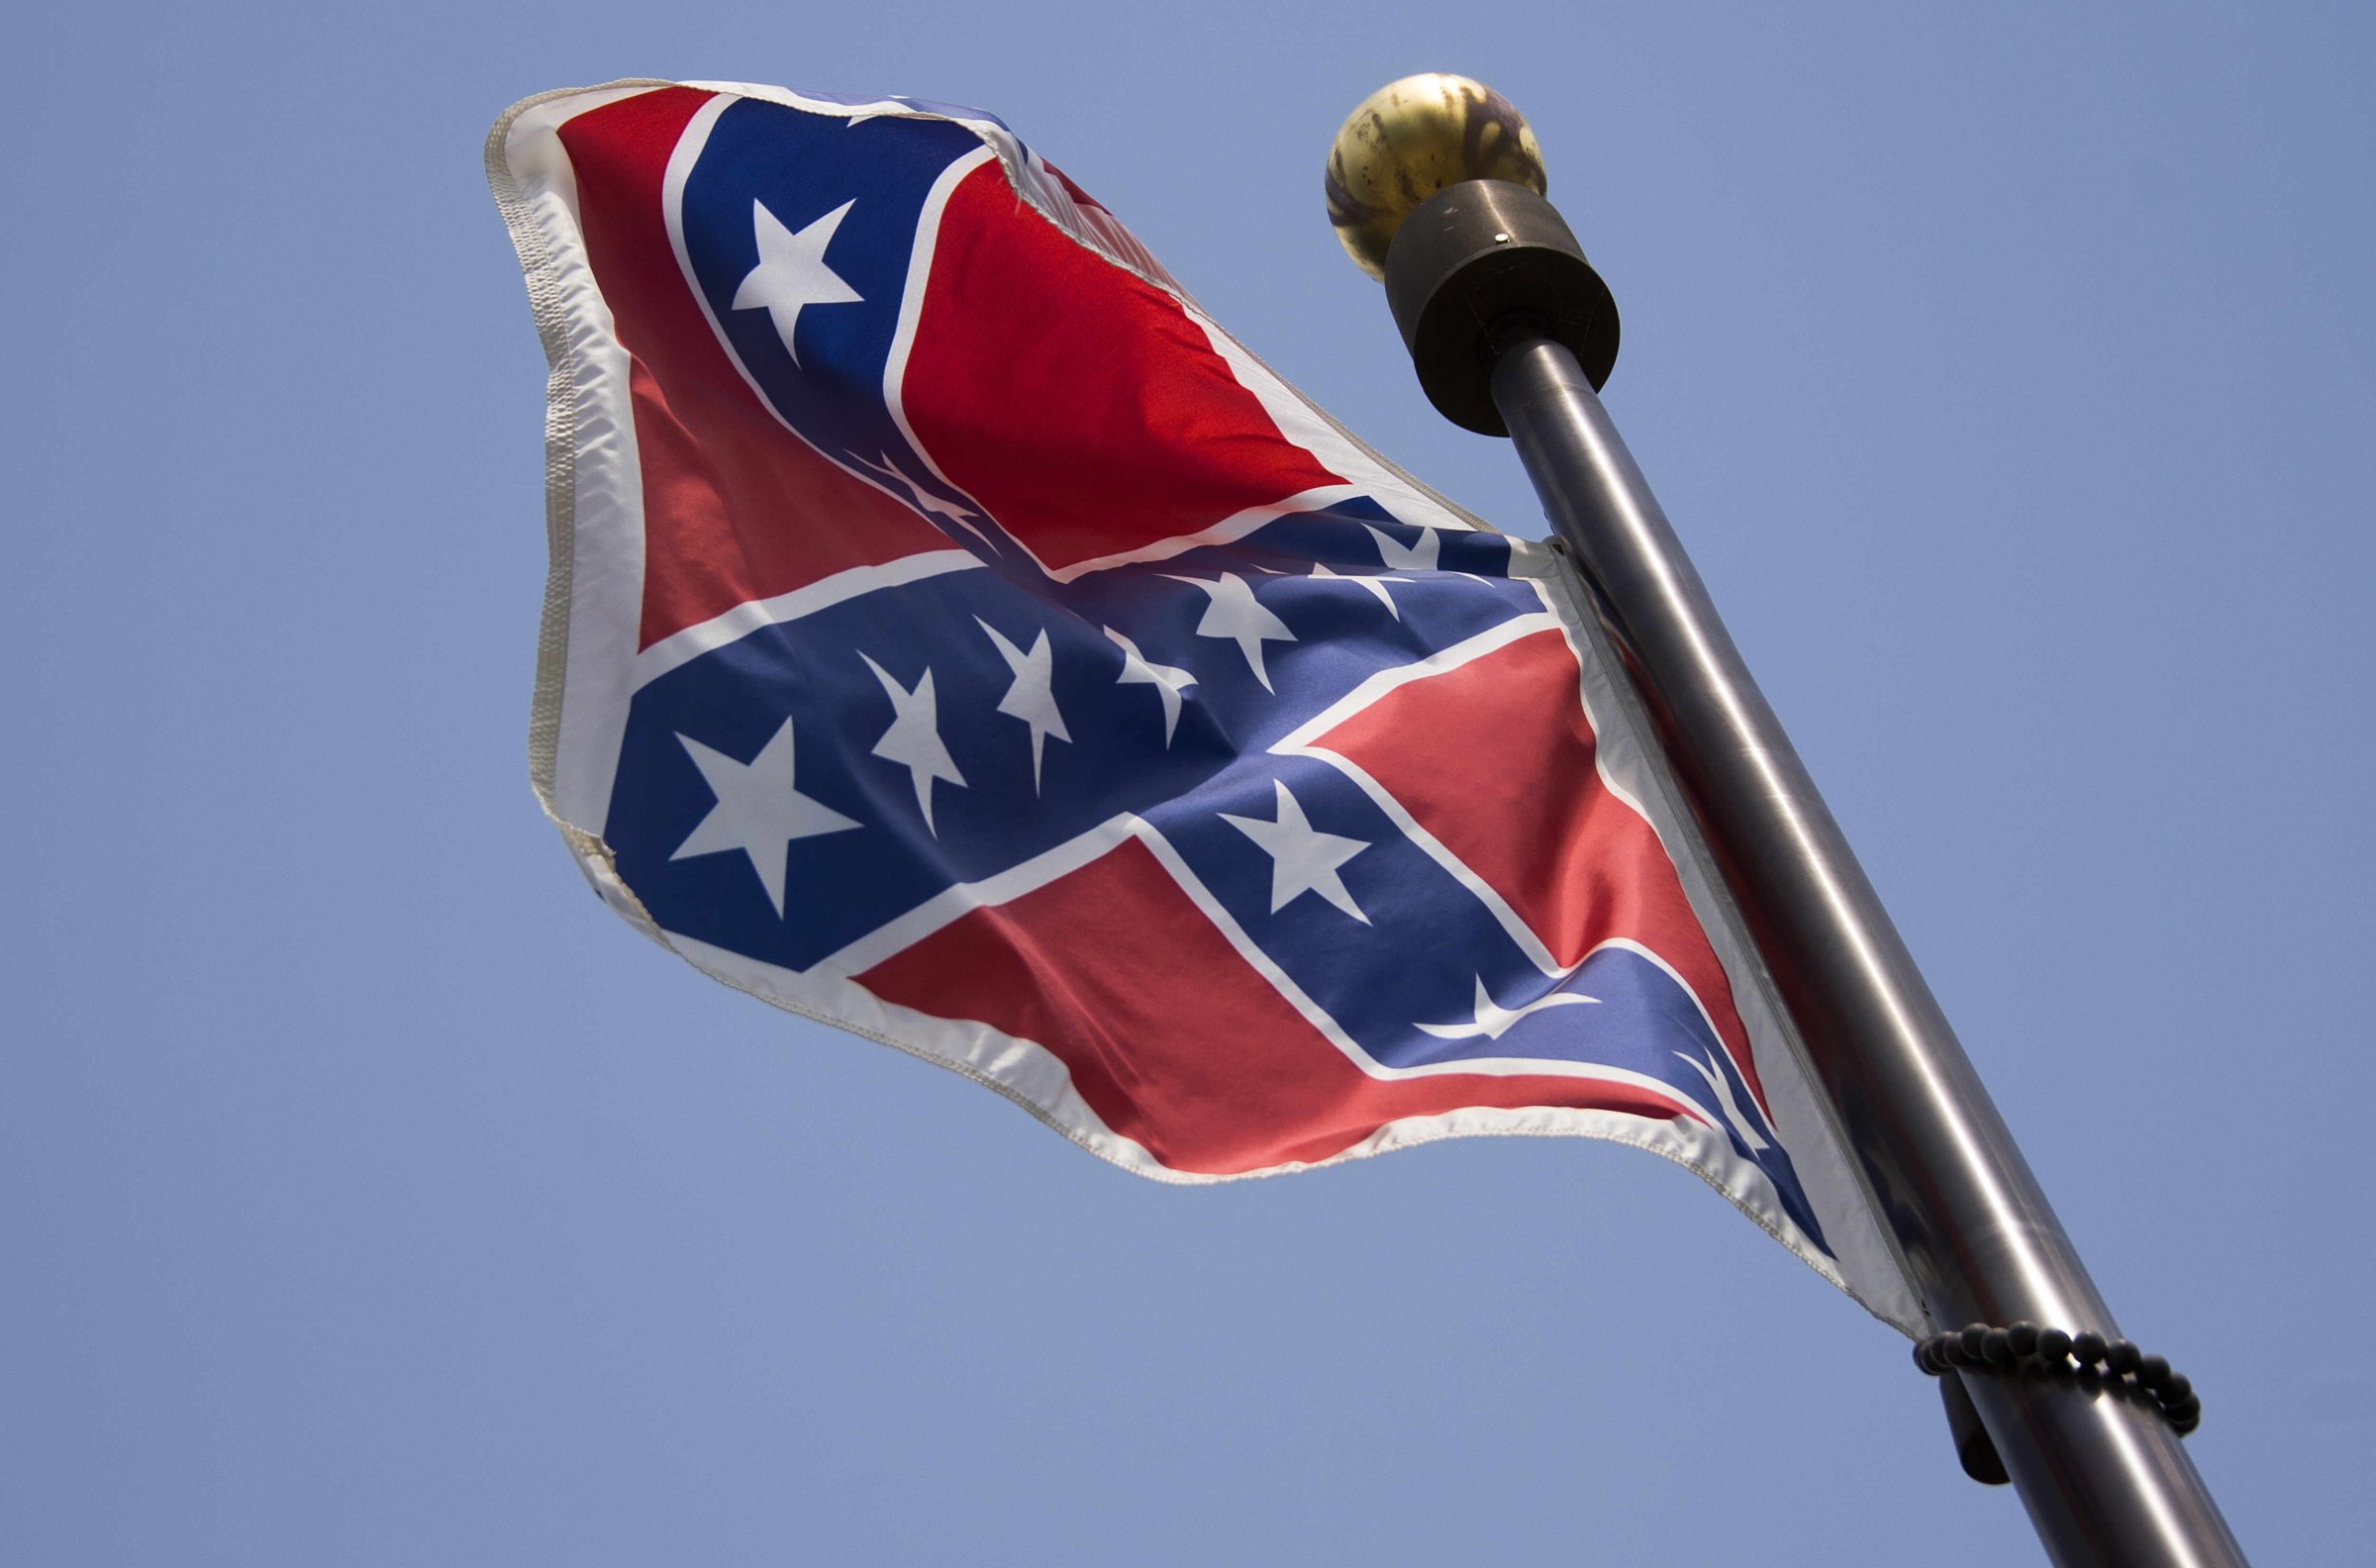 The Confederate Flag flies on the South Carolina State House grounds in Columbia, S.C. on June 24, 2015.